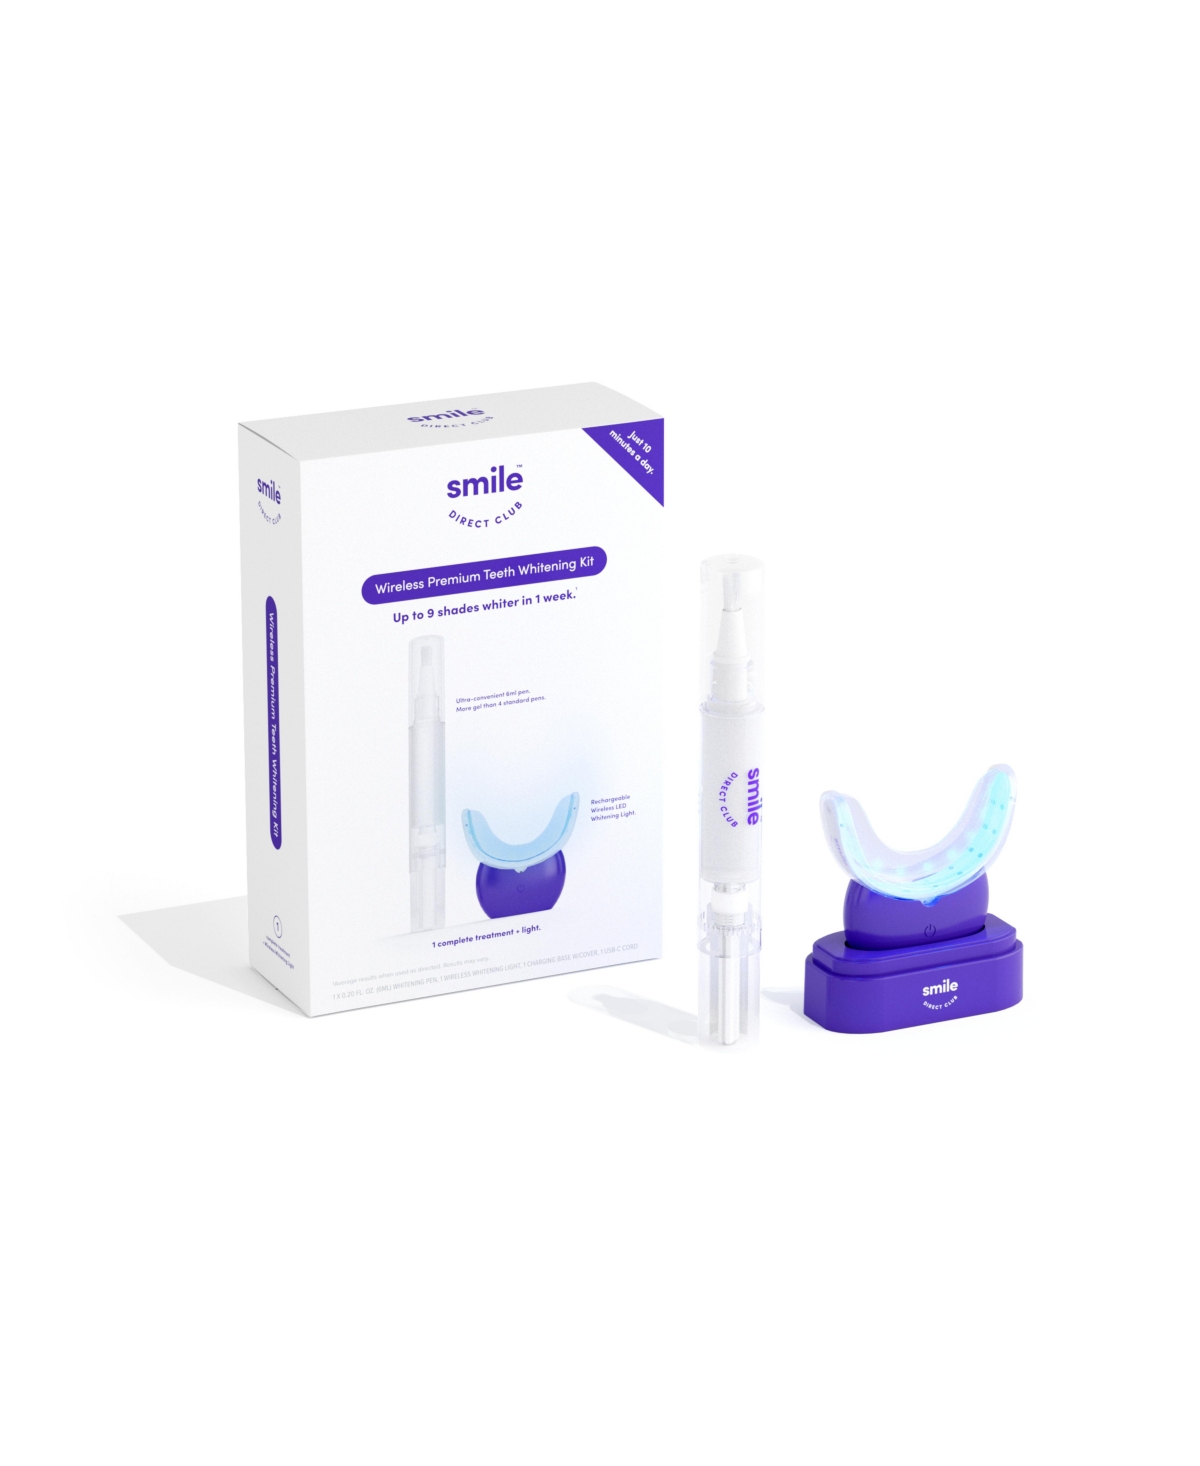 Smile Direct Club Teeth Whitening Kit With Premium Wireless Led Light And 1 Treatment Size Gel Pen In Blurple